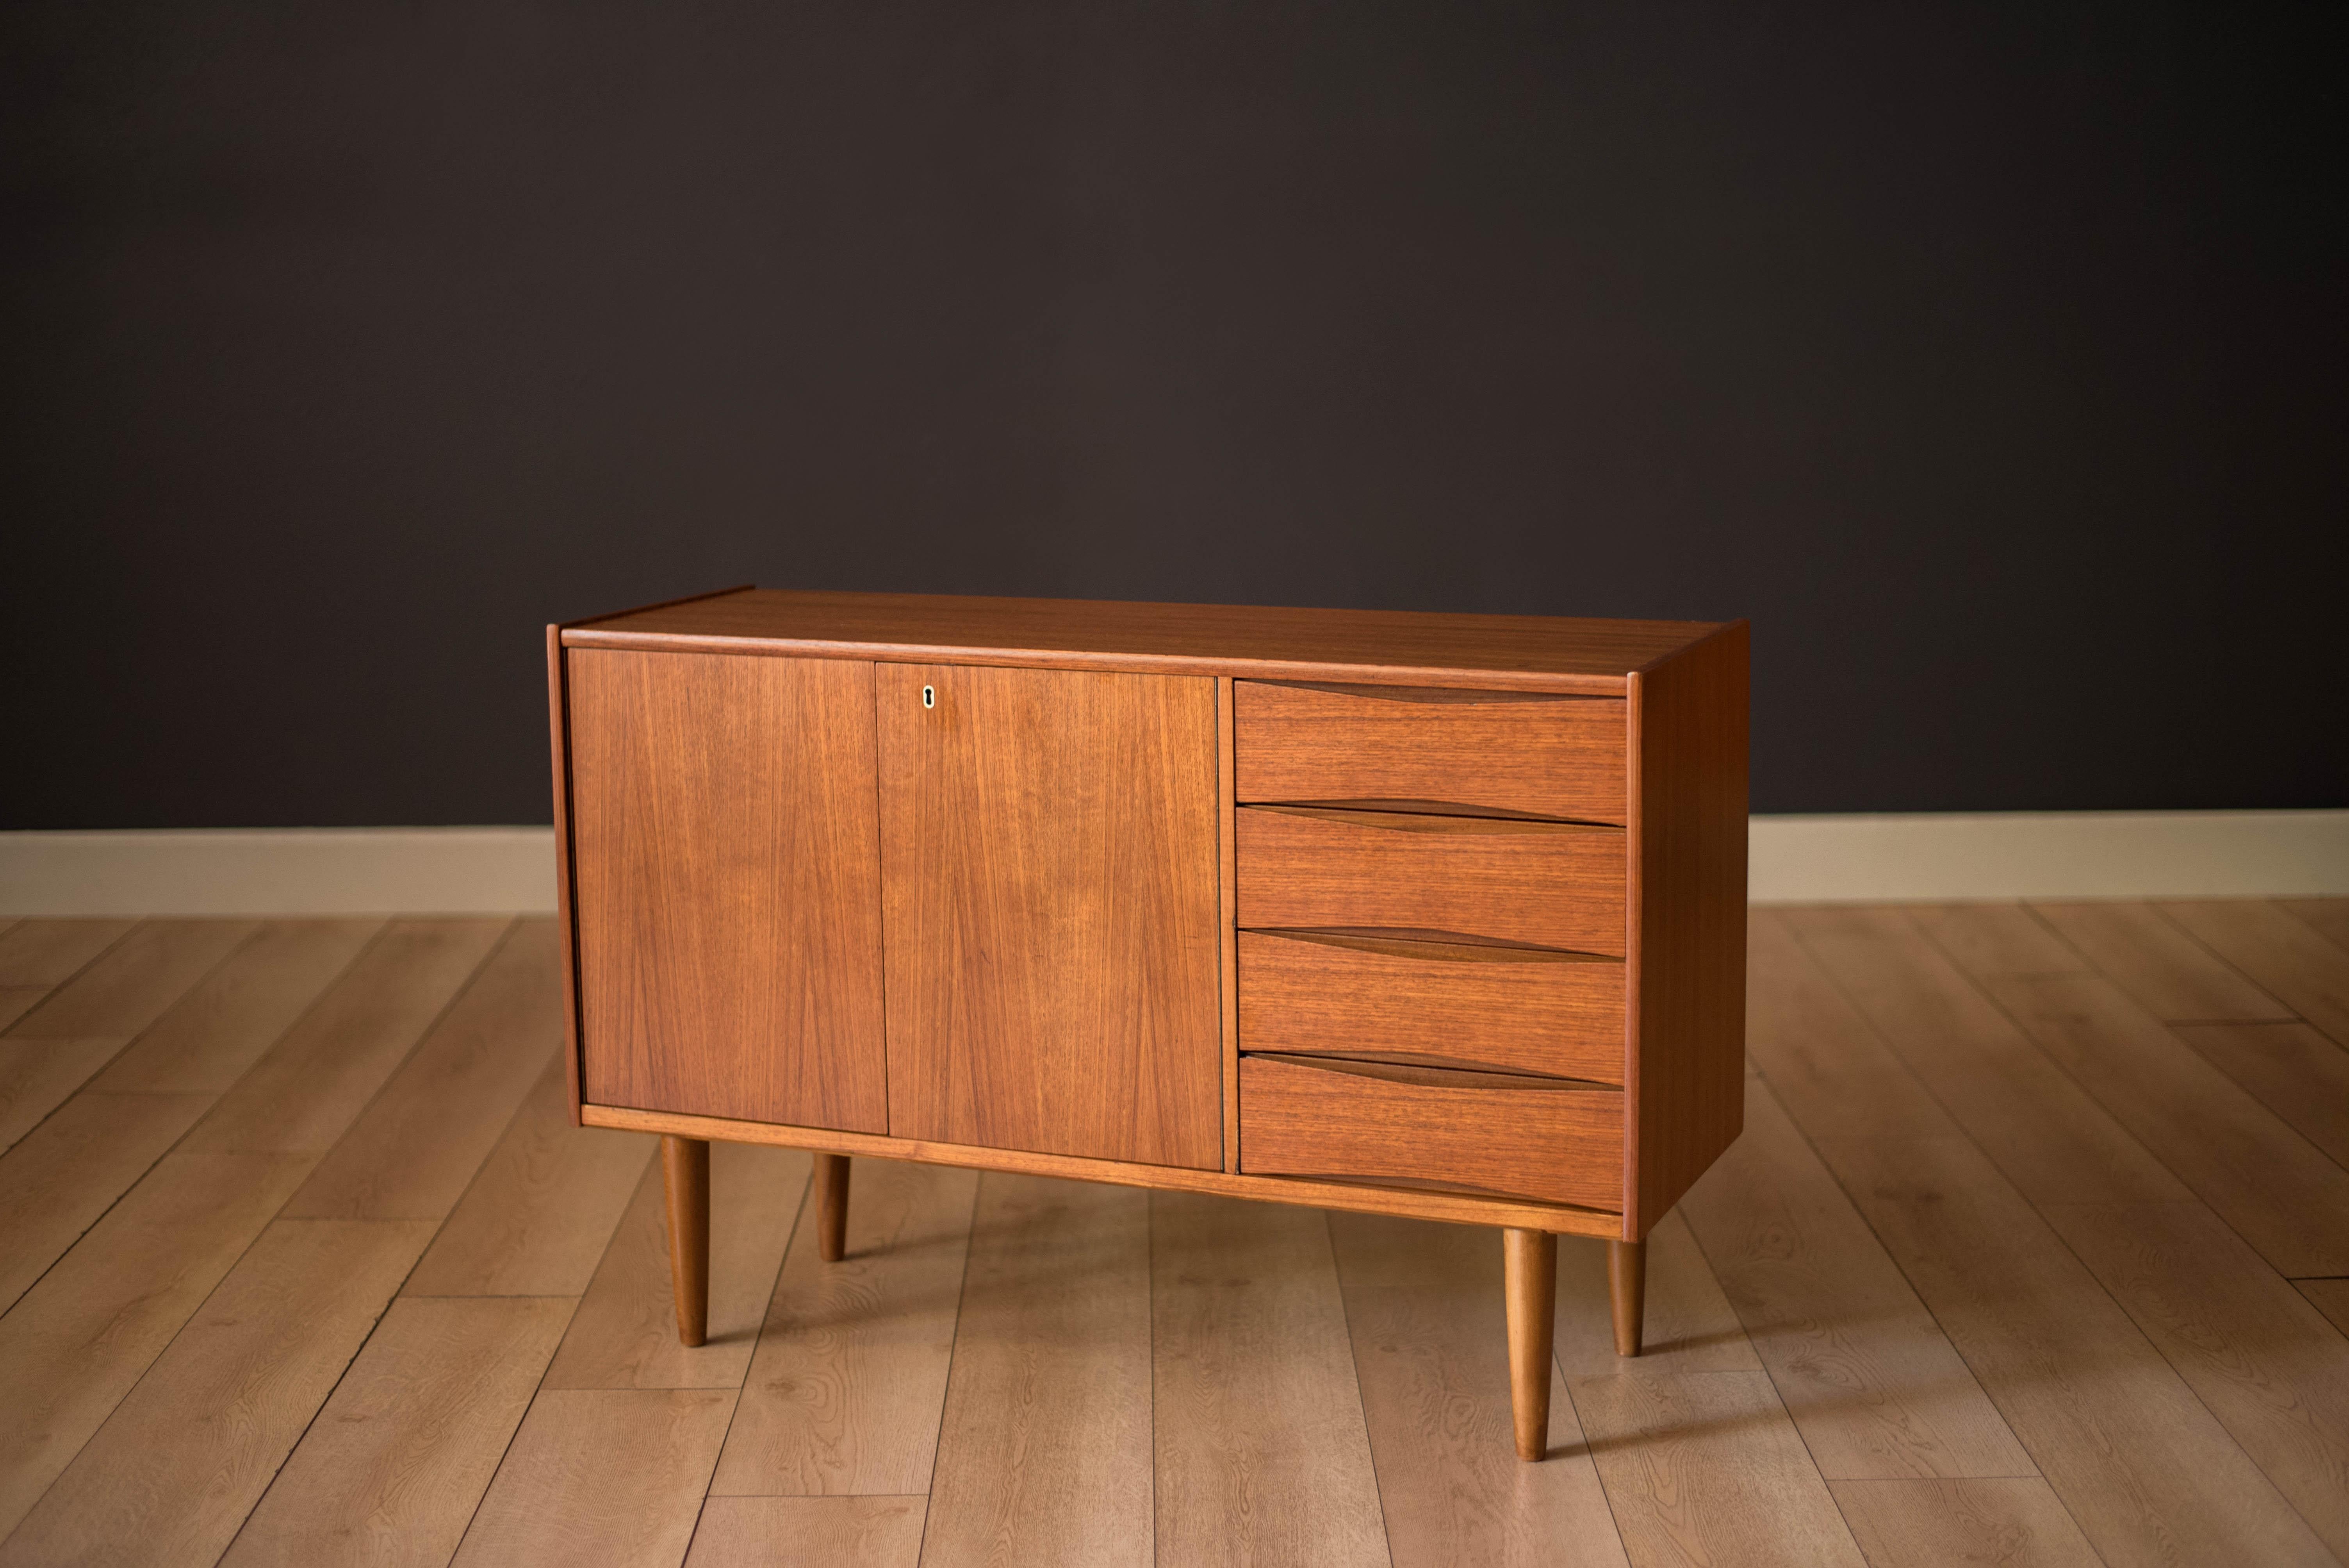 Mid-Century Modern sideboard credenza in teak designed by Fredrik Kayser for Skeie & Company of Norway, circa 1960s. This versatile piece is equipped with four drawers crafted with sculpted handles. The locking cabinet features swing out doors